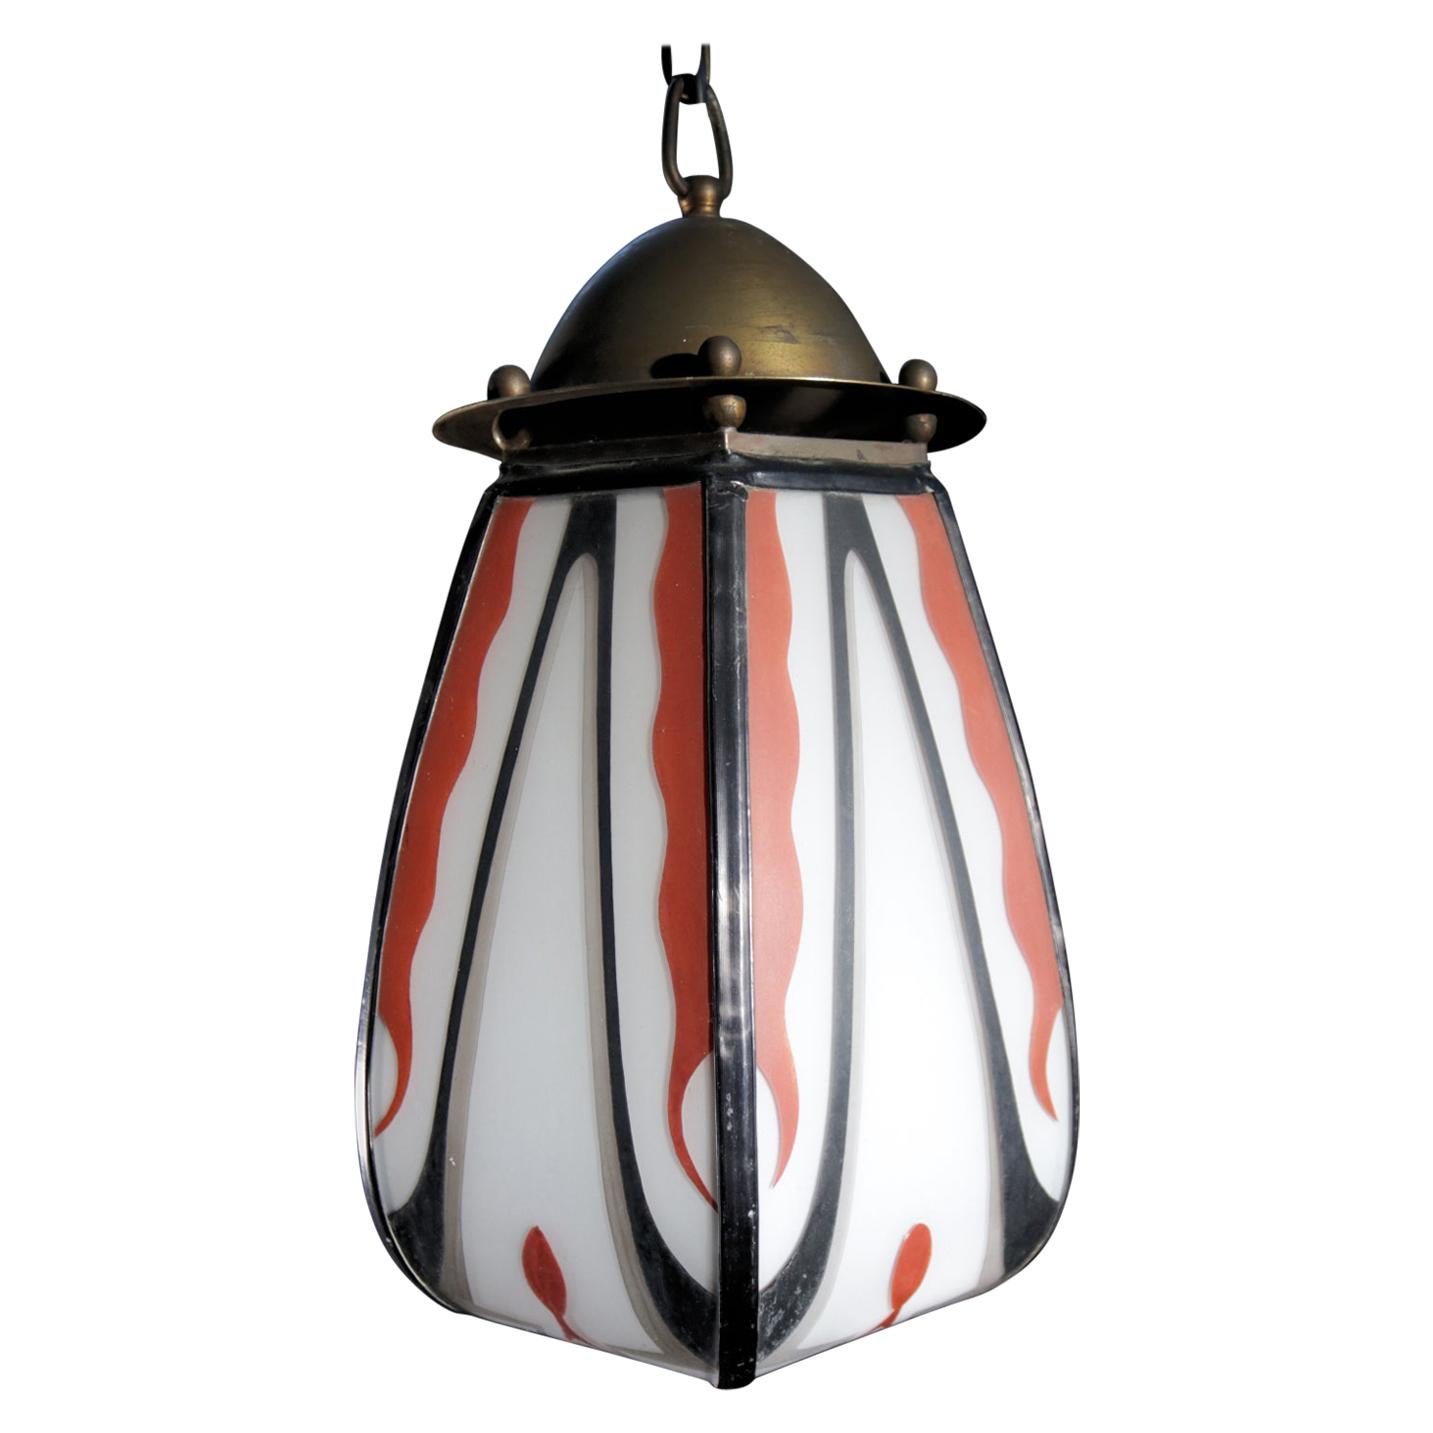 Dutch Art Deco Amsterdam School "De Nieuwe Honsel" Stained Glass Hanging Lamp For Sale